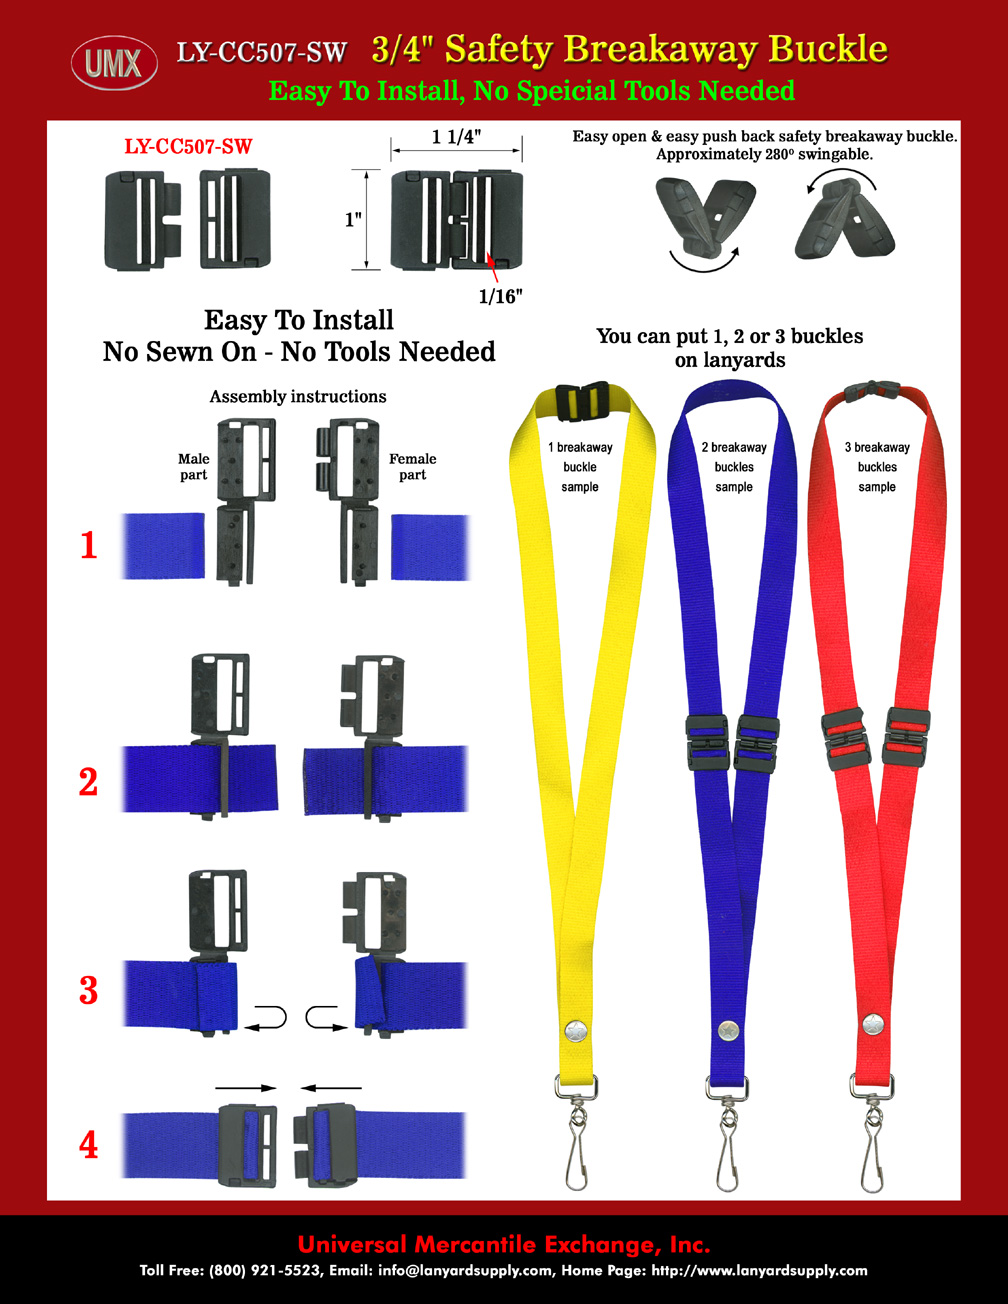 Great Upgrade For Your Exisiting Lanyards With Safety Breakaway Buckles.